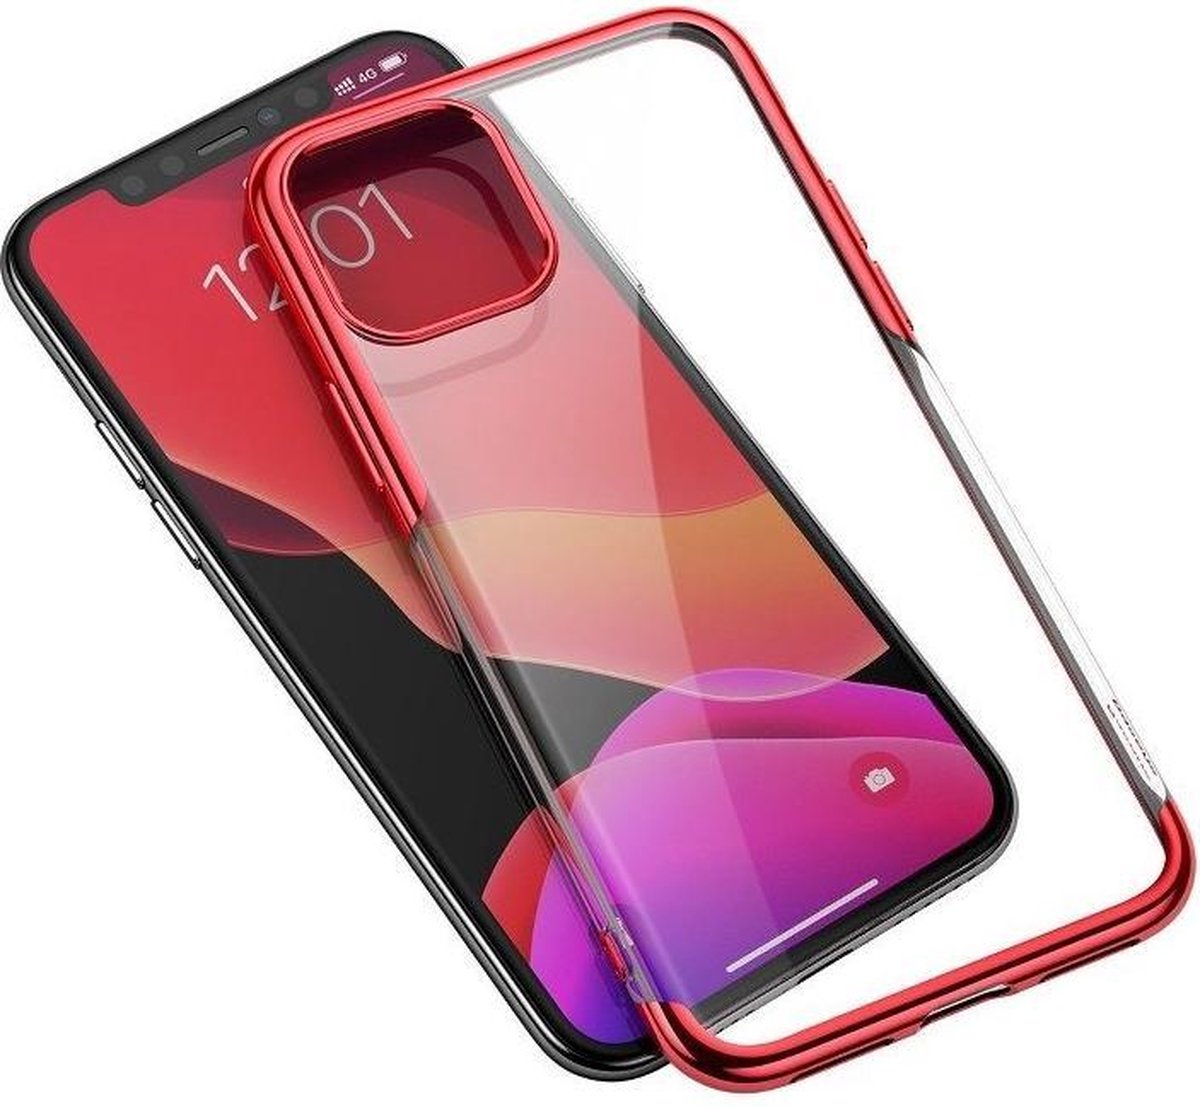 Beschermende softcase iPhone 11 - Shining - Transparant/rood